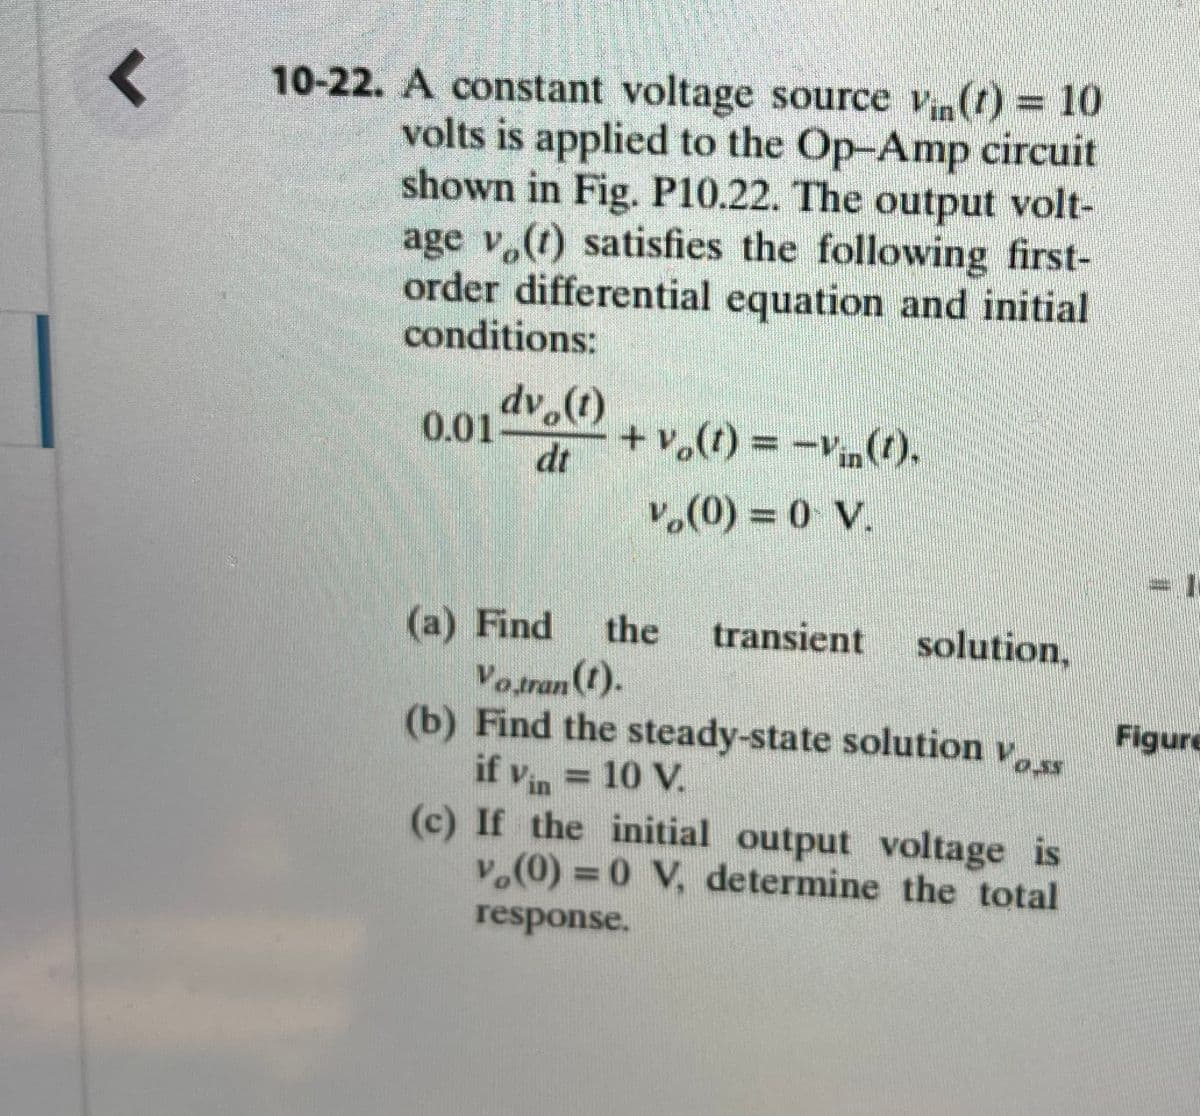 10-22. A constant voltage source vn(t) = 10
volts is applied to the Op-Amp circuit
shown in Fig. P10.22. The output volt-
age v,(t) satisfies the following first-
order differential equation and initial
conditions:
dv.(t)
+V。(1) = -V(り、
0.01
dt
in
v.(0) = 0 V.
%3D
(a) Find
Votran (1).
(b) Find the steady-state solution v
if vin = 10 V.
(c) If the initial output voltage is
v.(0) = 0 V, determine the total
the
transient solution,
Figure
0.55
%3D
response.
